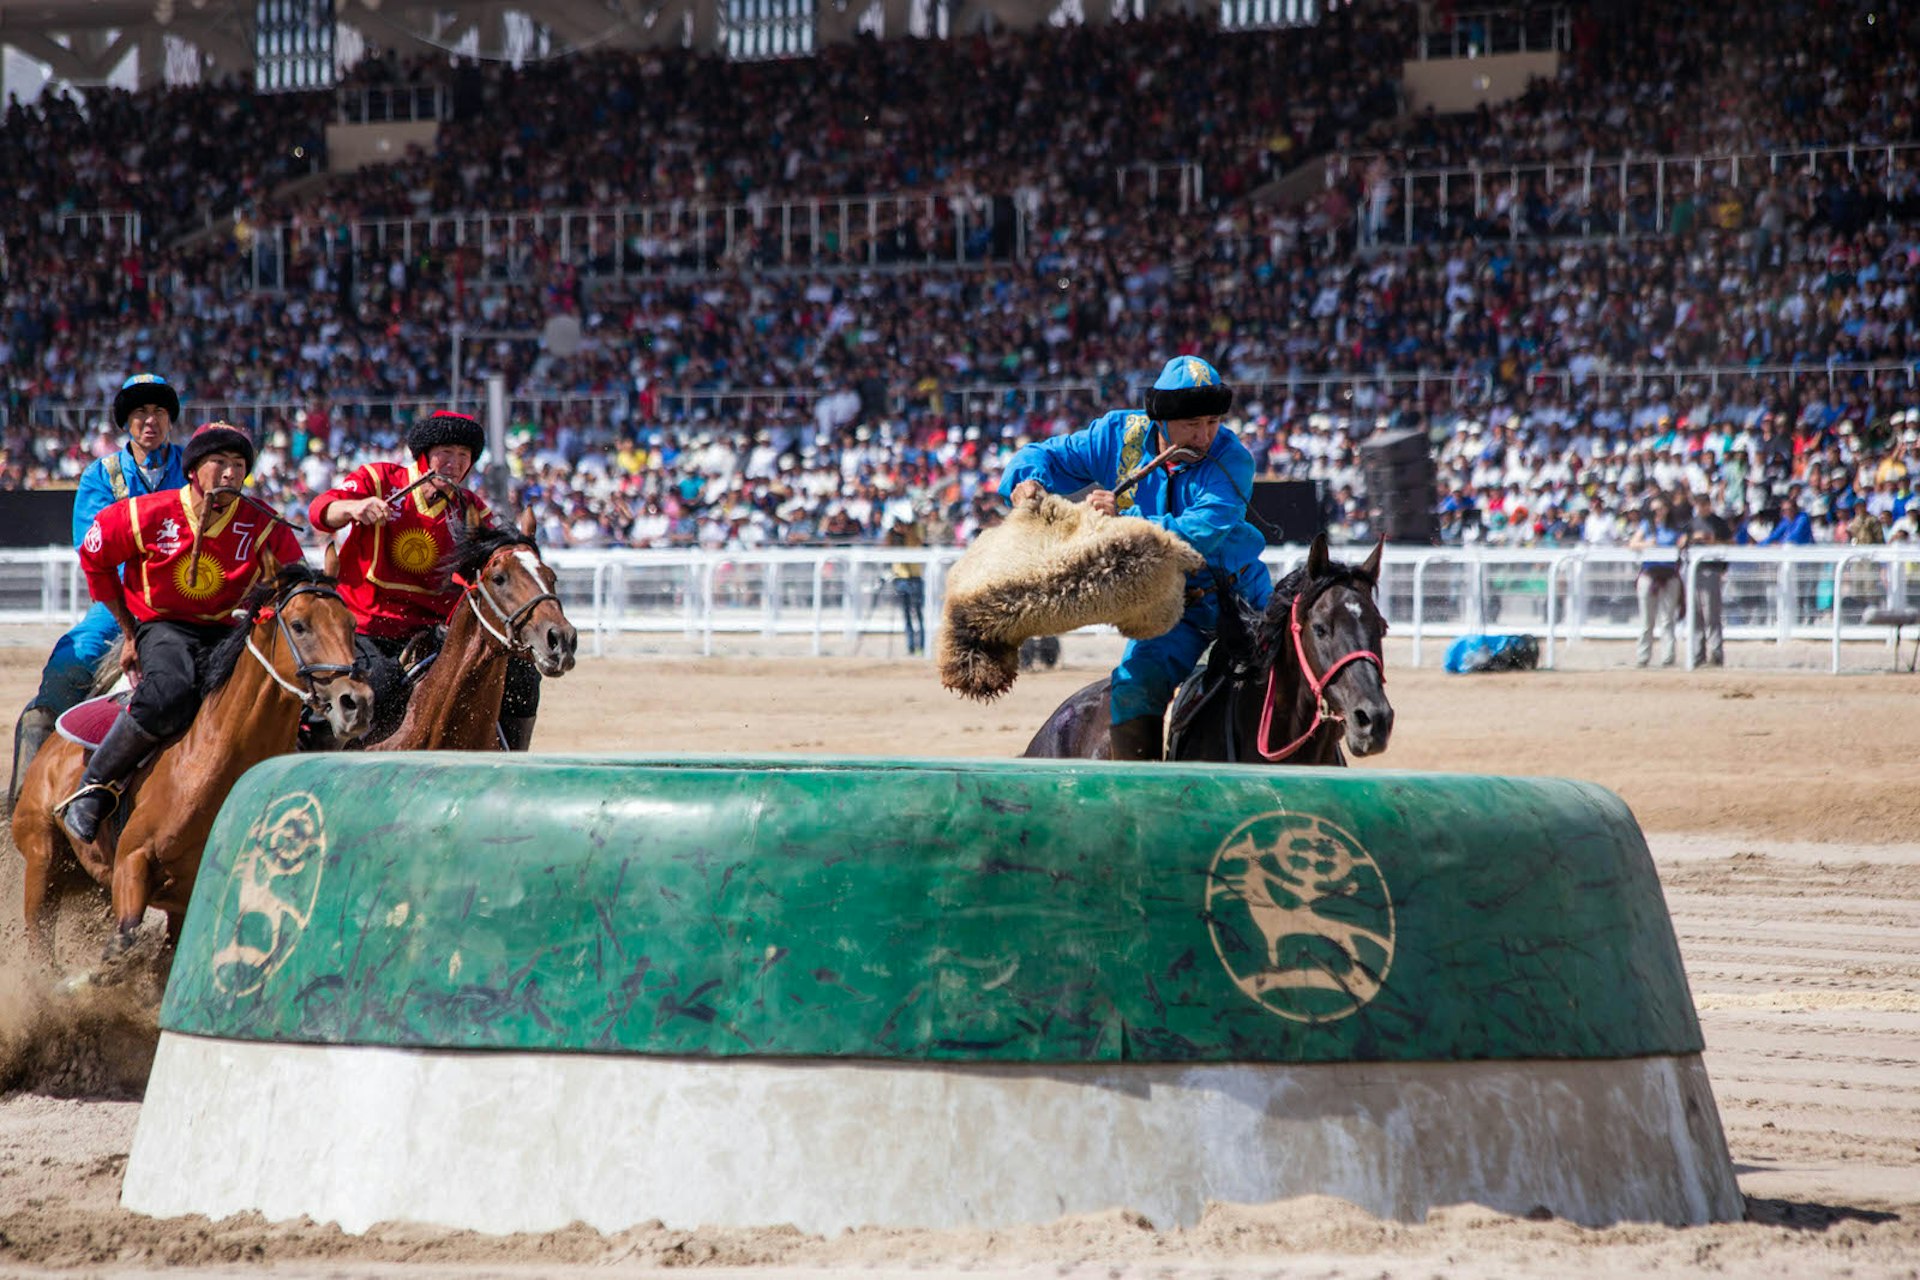 A Kazakh rider scores against the Kyrgyzstan team during the kok-boru finals at the 2016 World Nomad Games in Kyrgyzstan © Stephen Lioy / Lonely Planet